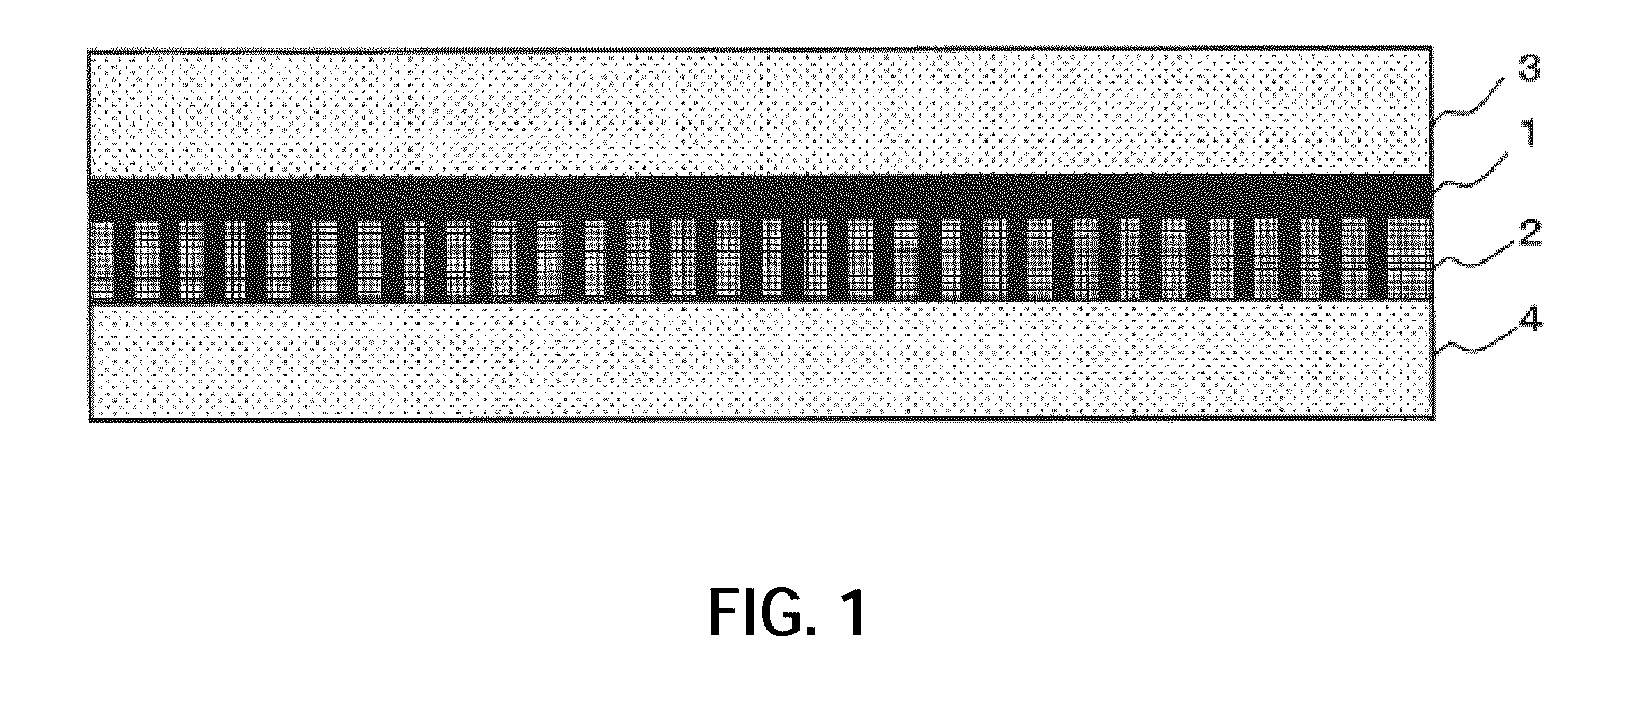 Co2-facilitated transport membrane and method for producing the same